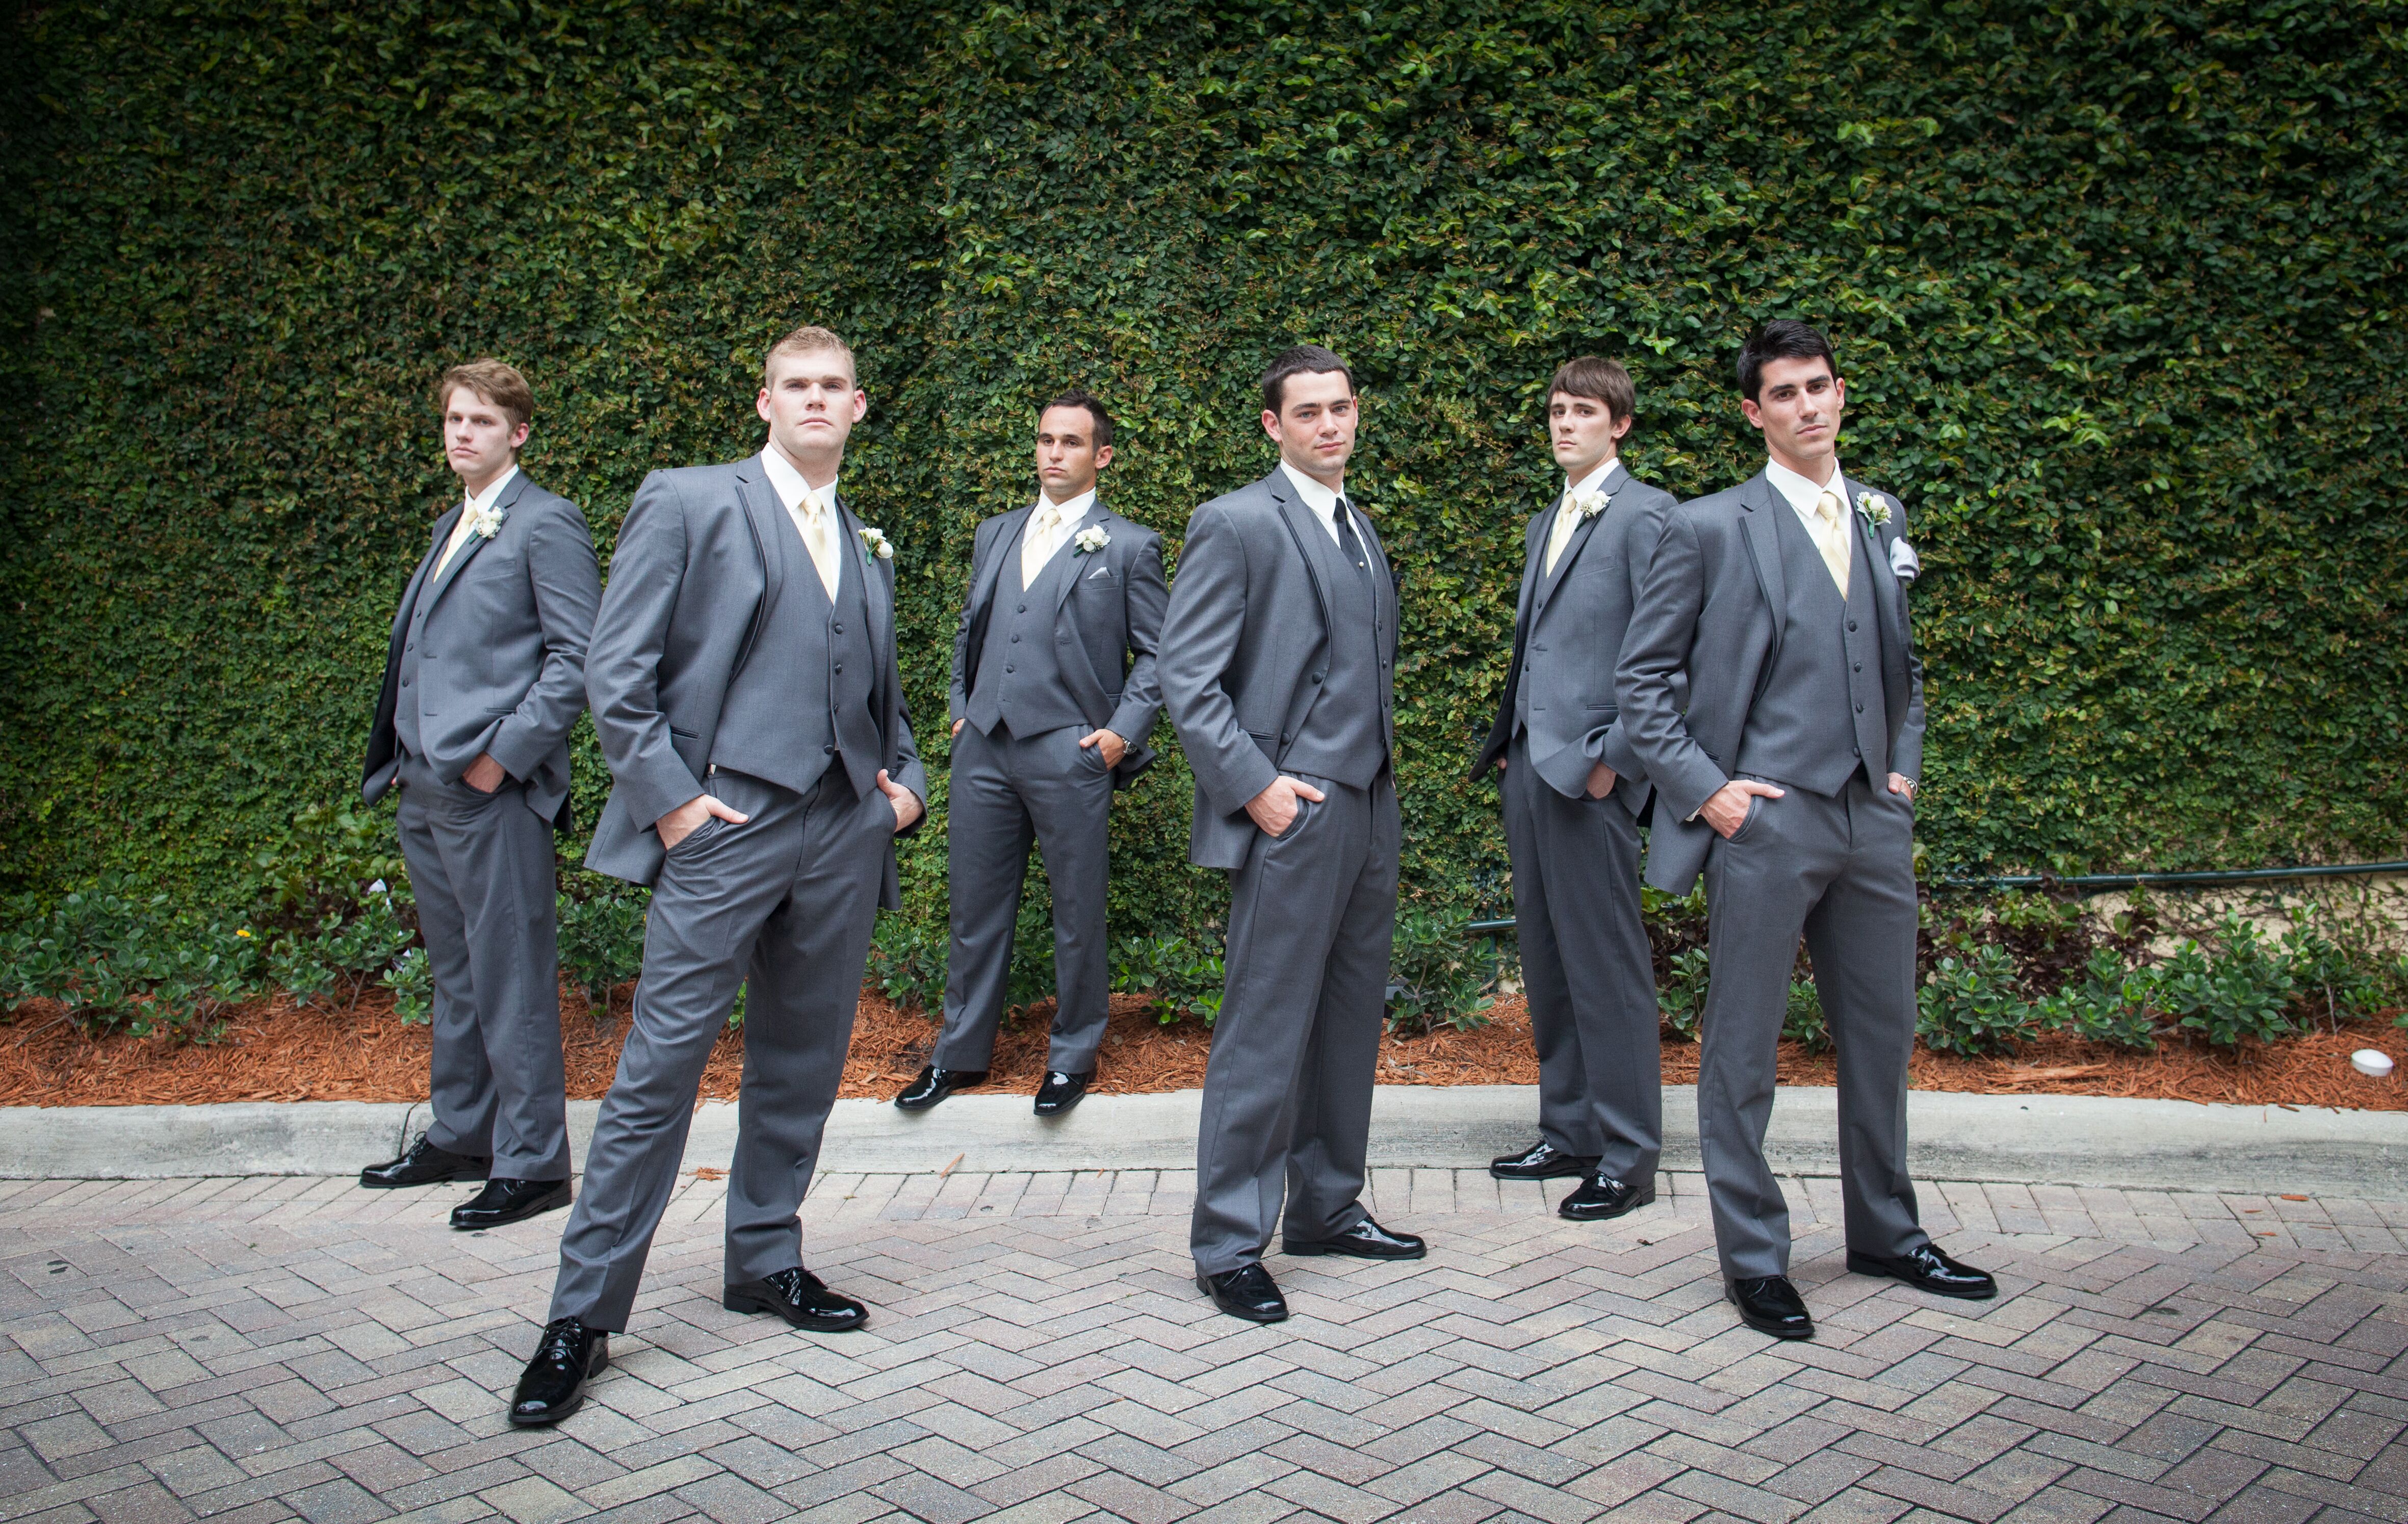 Gray Men’s Wearhouse Tuxedos with Yellow Ties